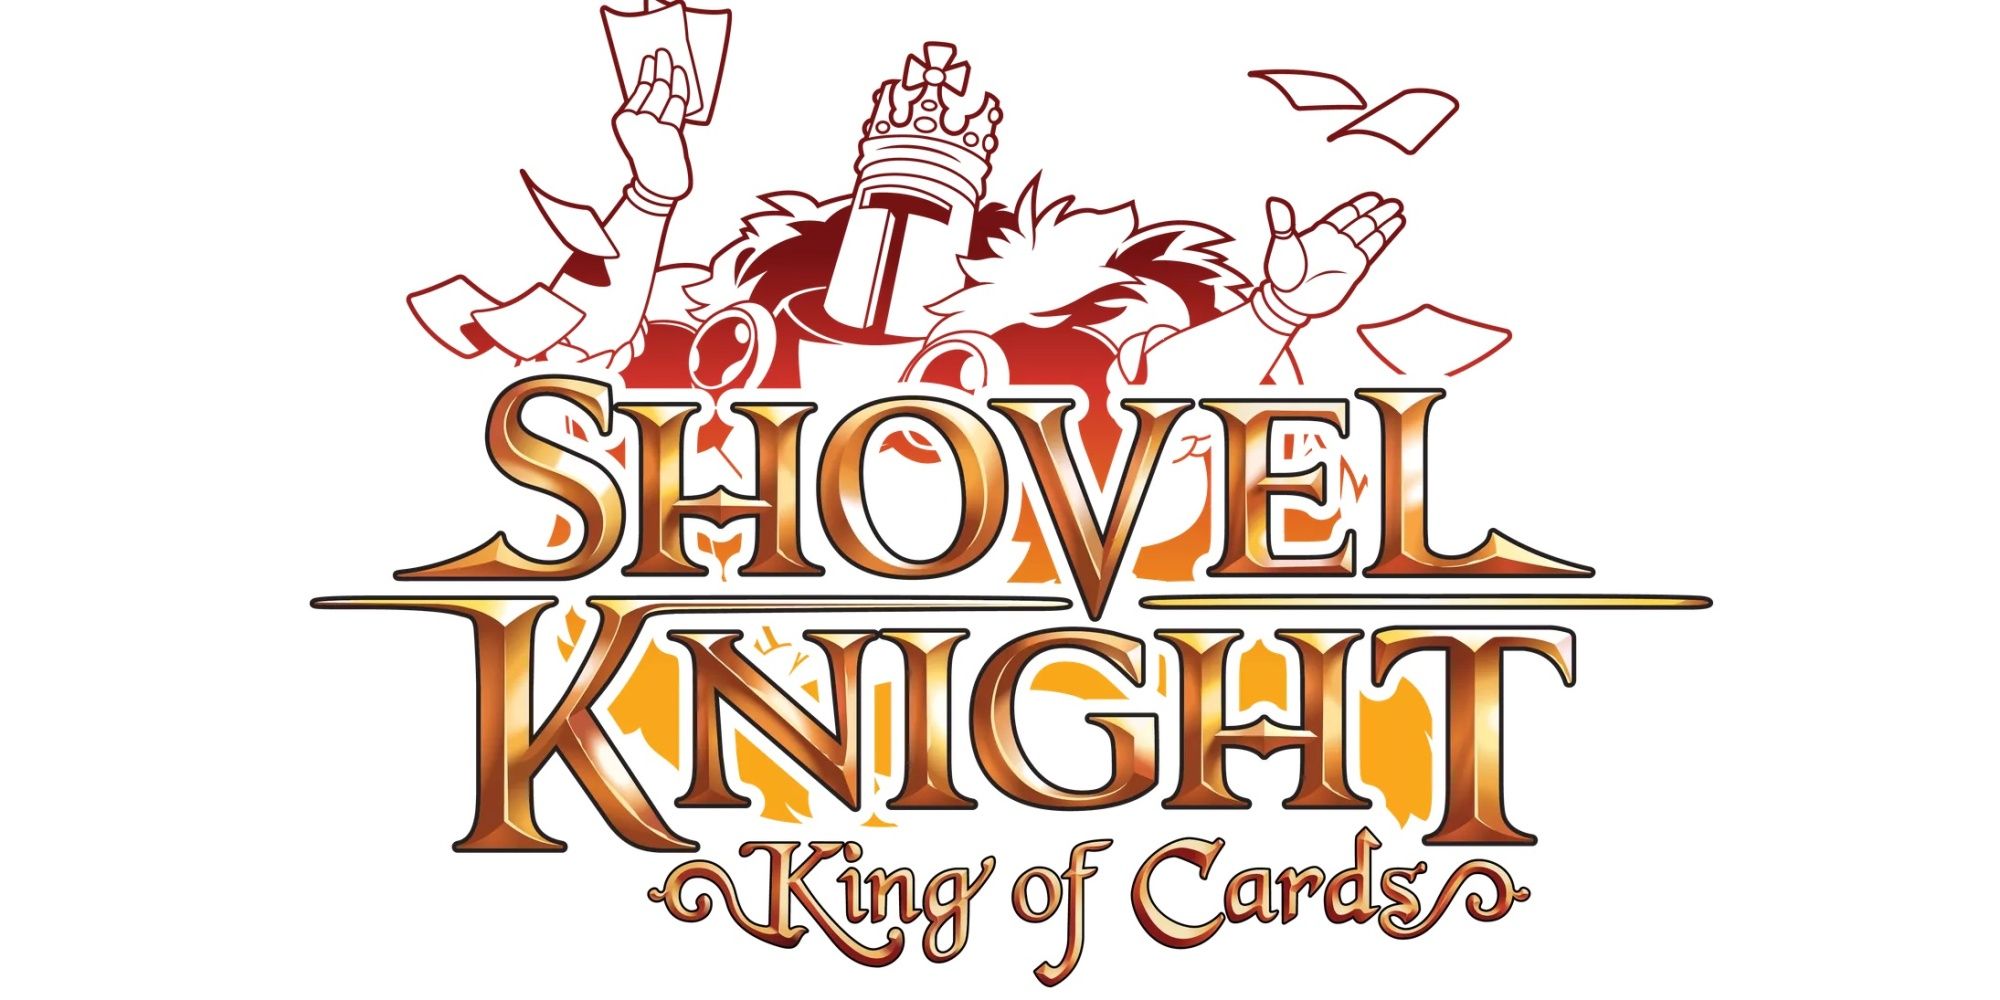 The logo from Shovel Knight King of Cards